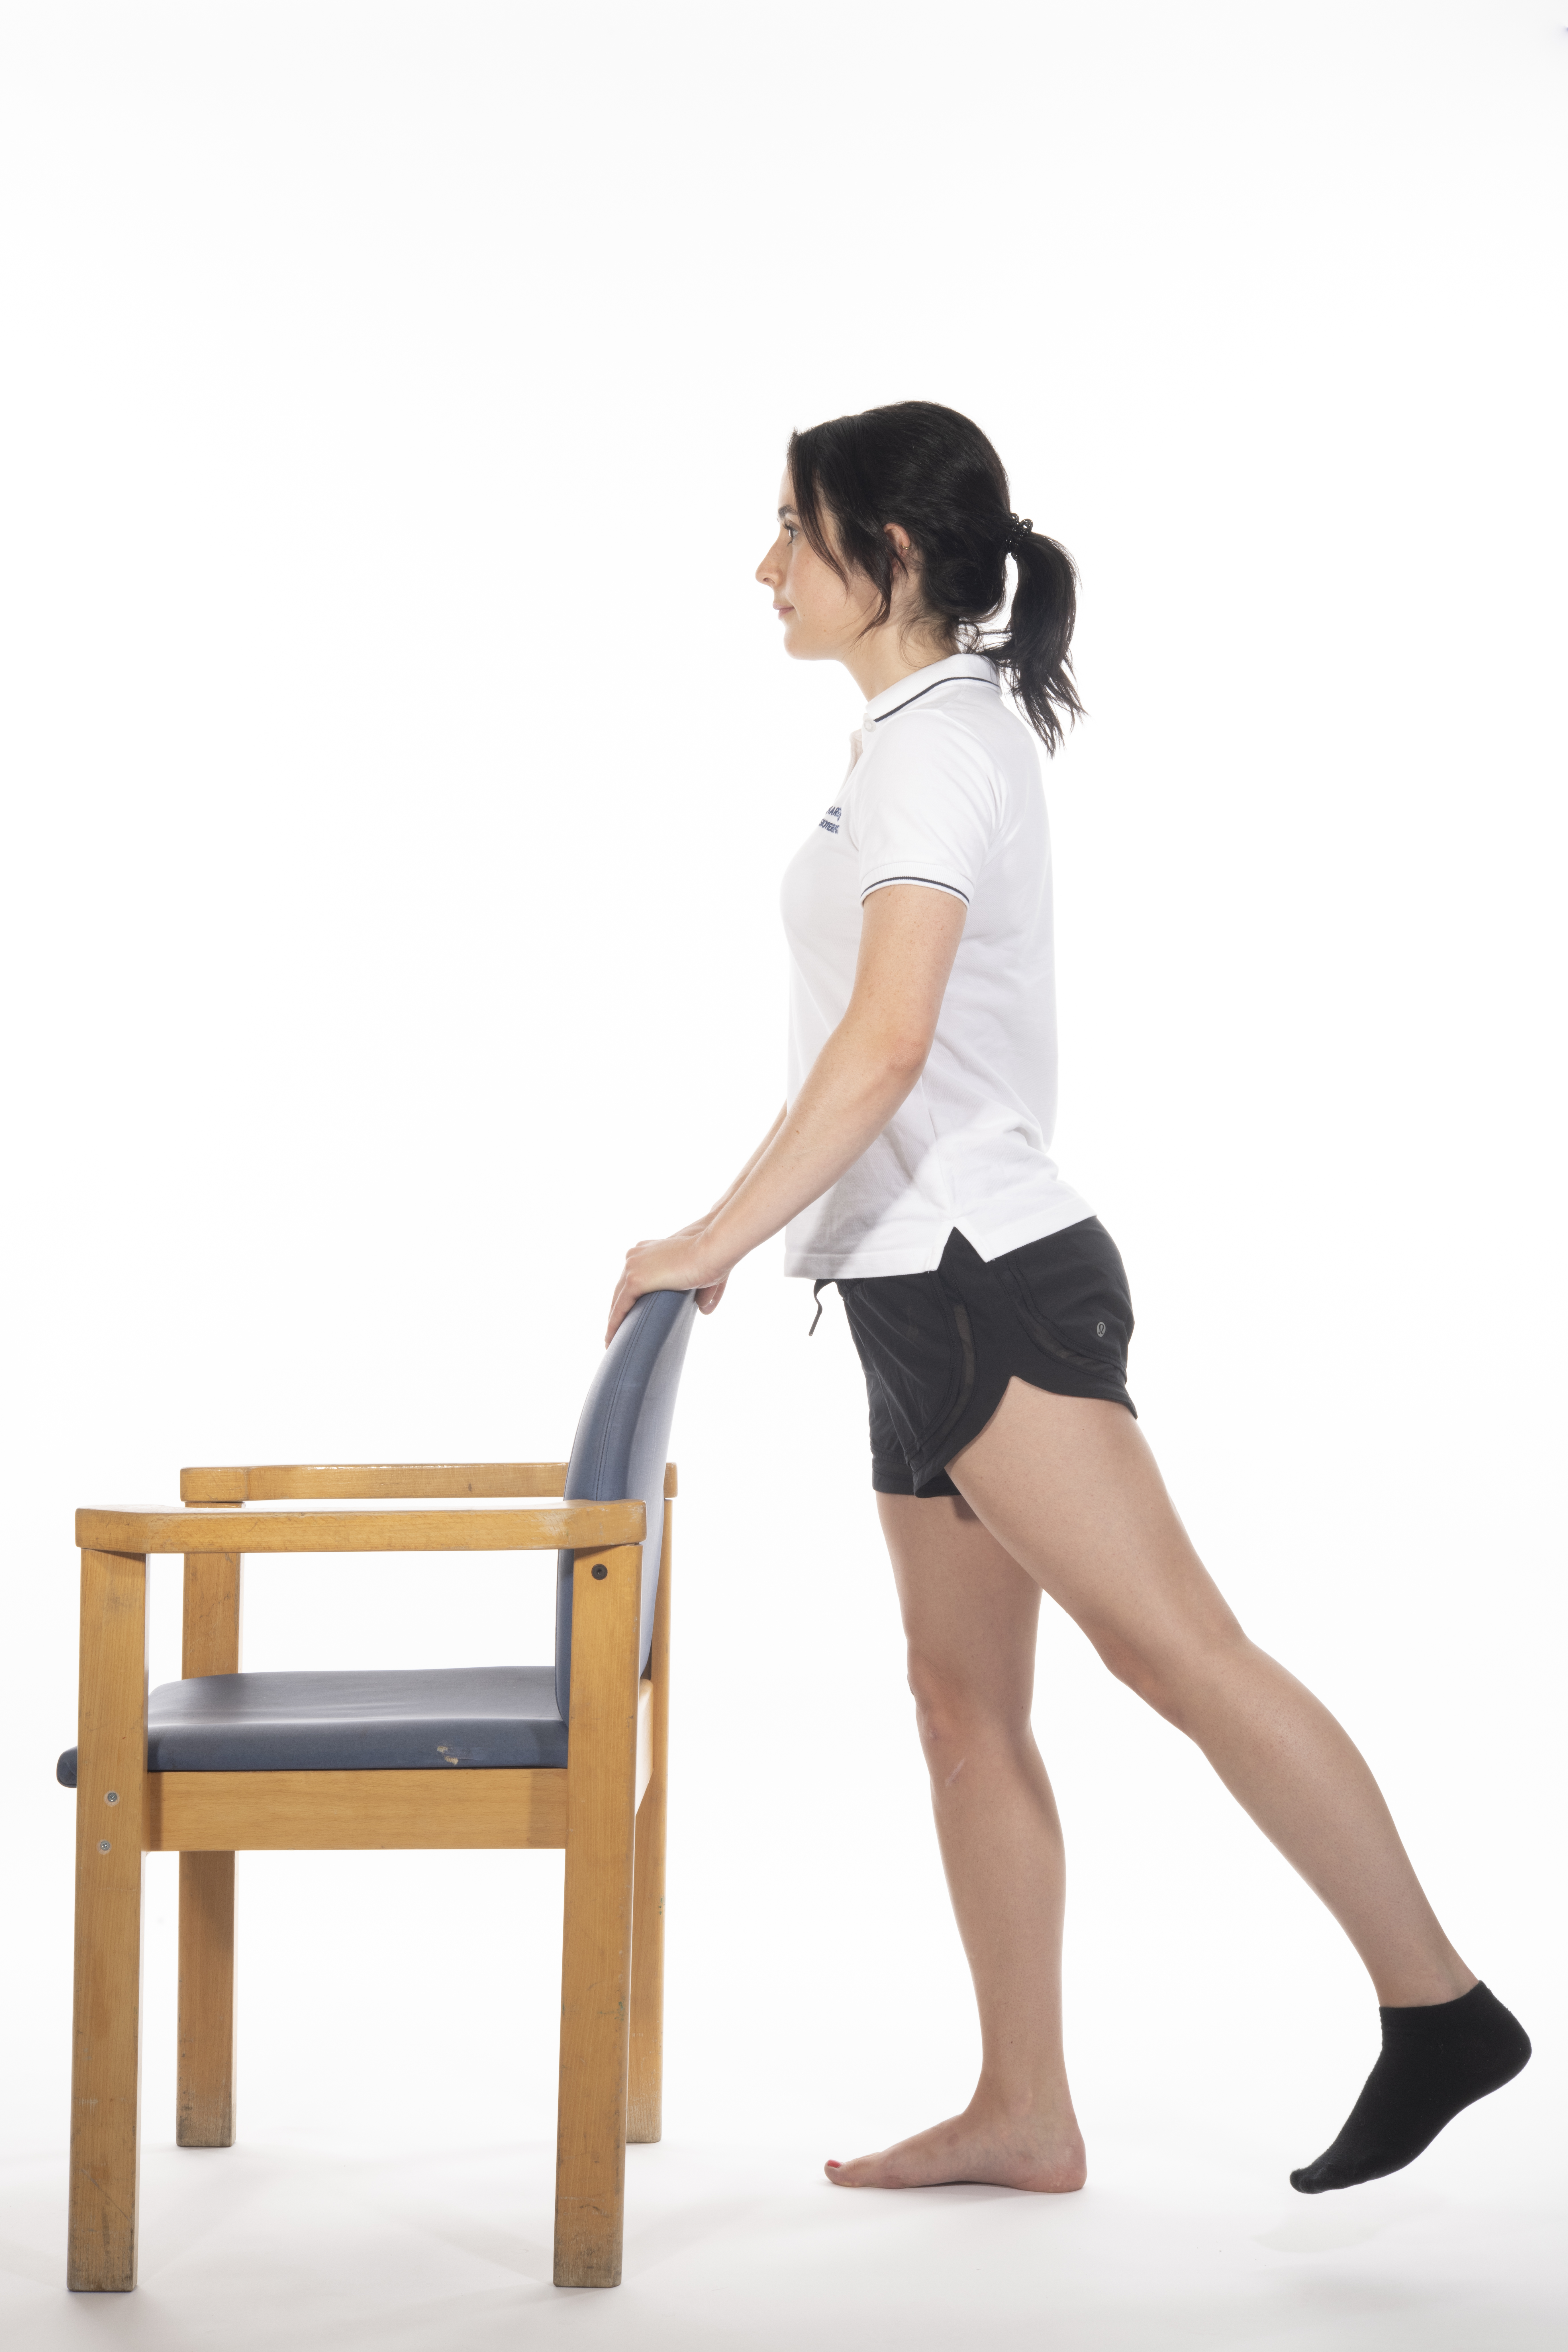 Hip extension in standing exercise; lift your operated leg backwards, clenching your bottom muscles while keeping your knee straight